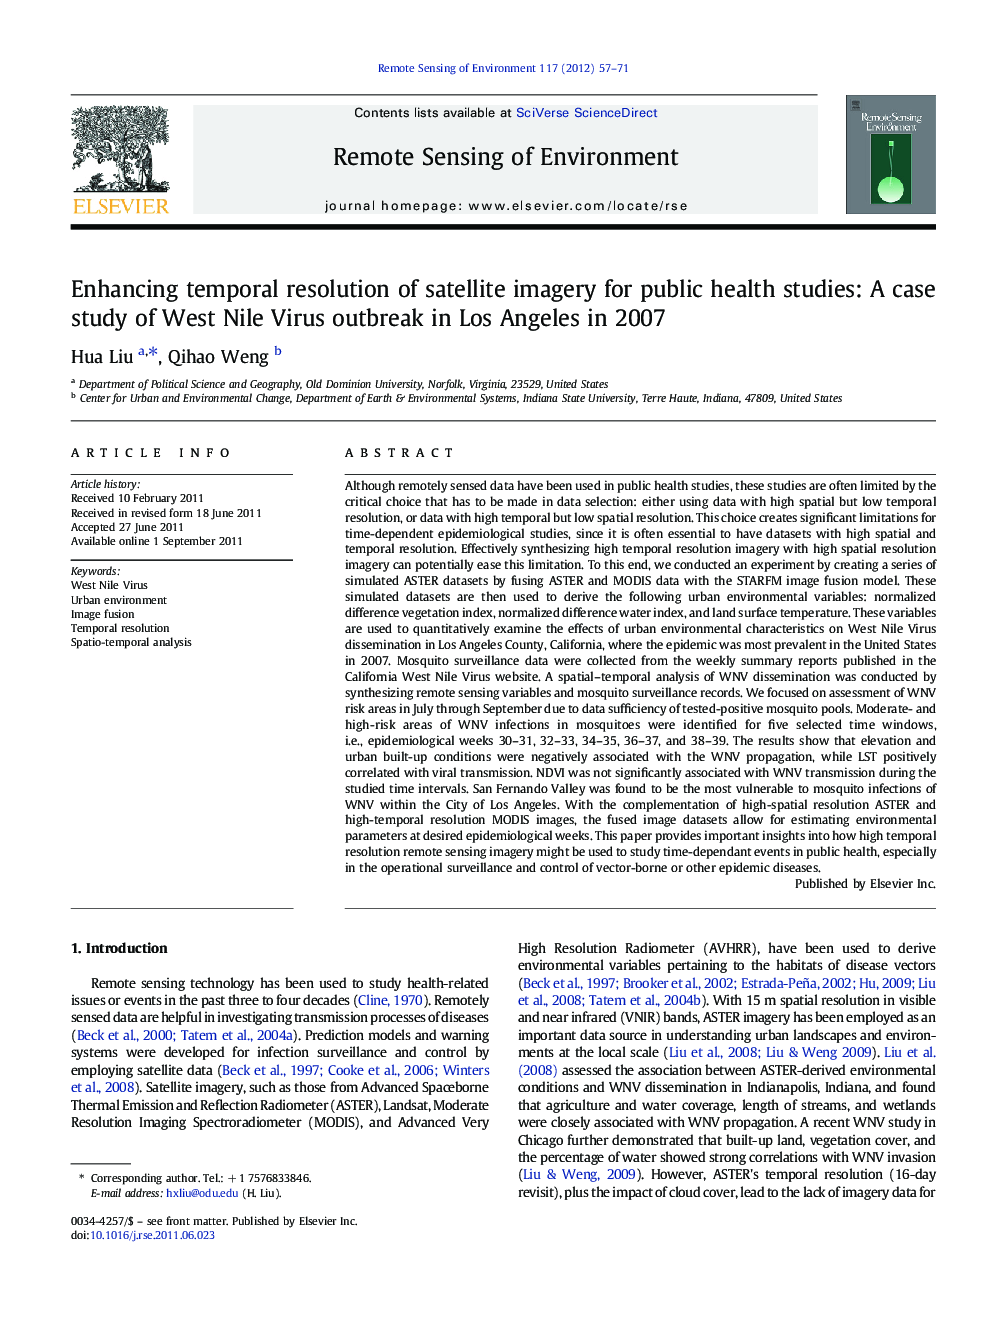 Enhancing temporal resolution of satellite imagery for public health studies: A case study of West Nile Virus outbreak in Los Angeles in 2007